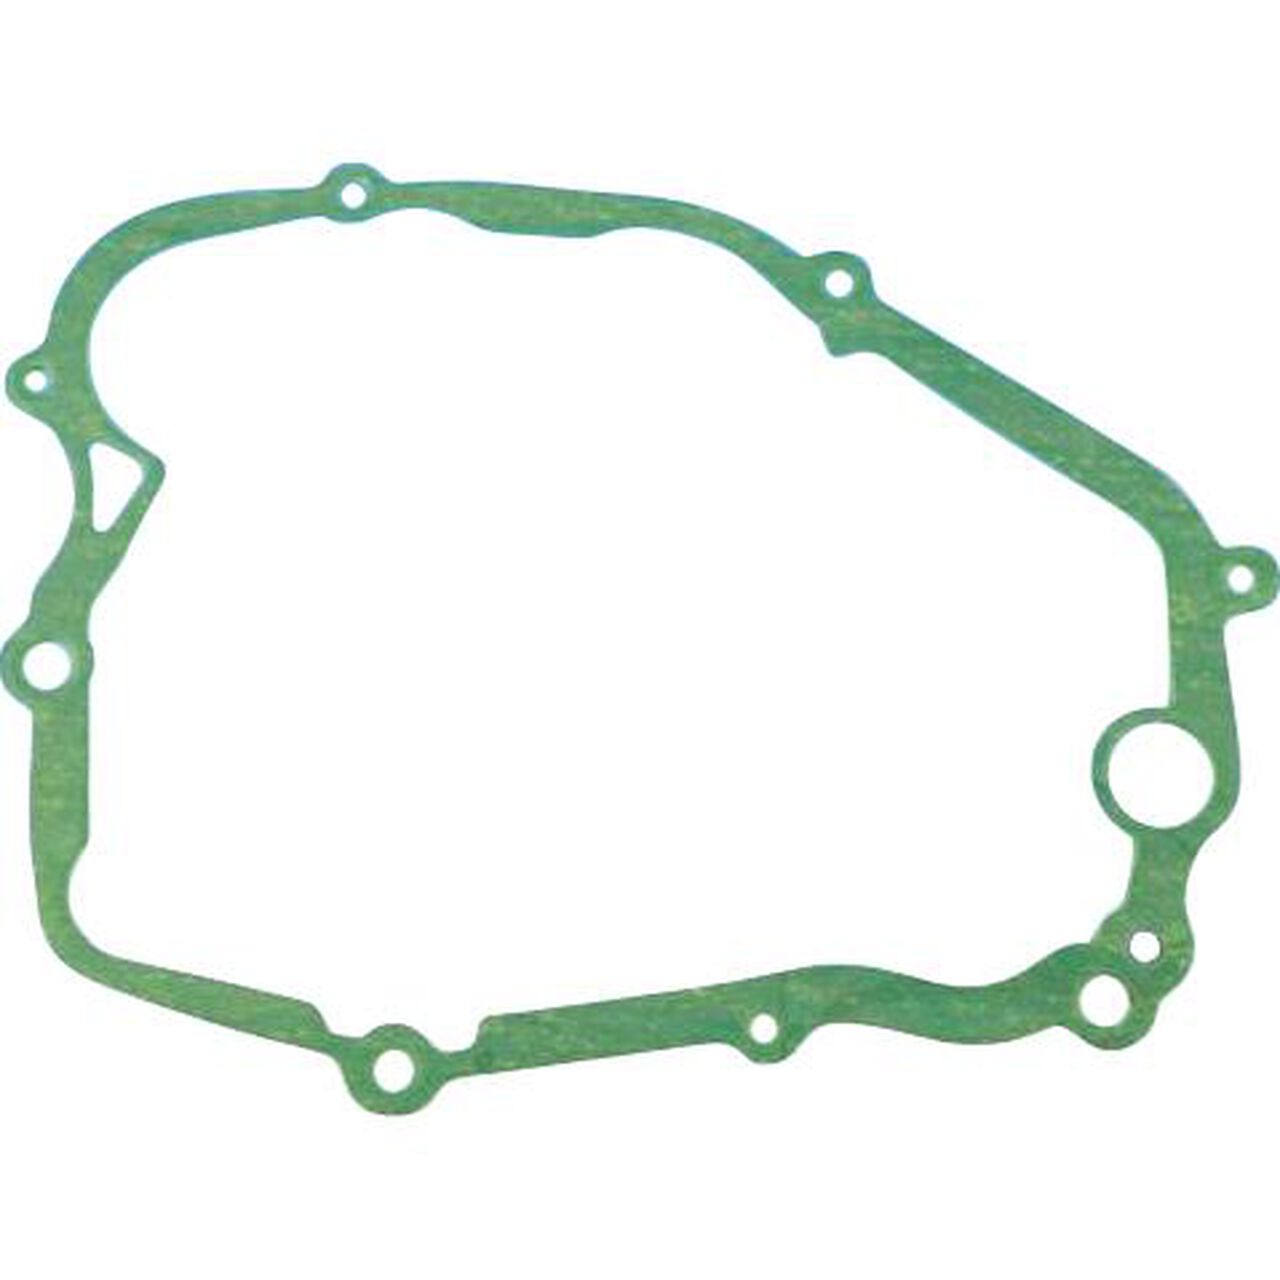 Athena Clutch Cover Gasket For Yamaha T-Max 500 01-11